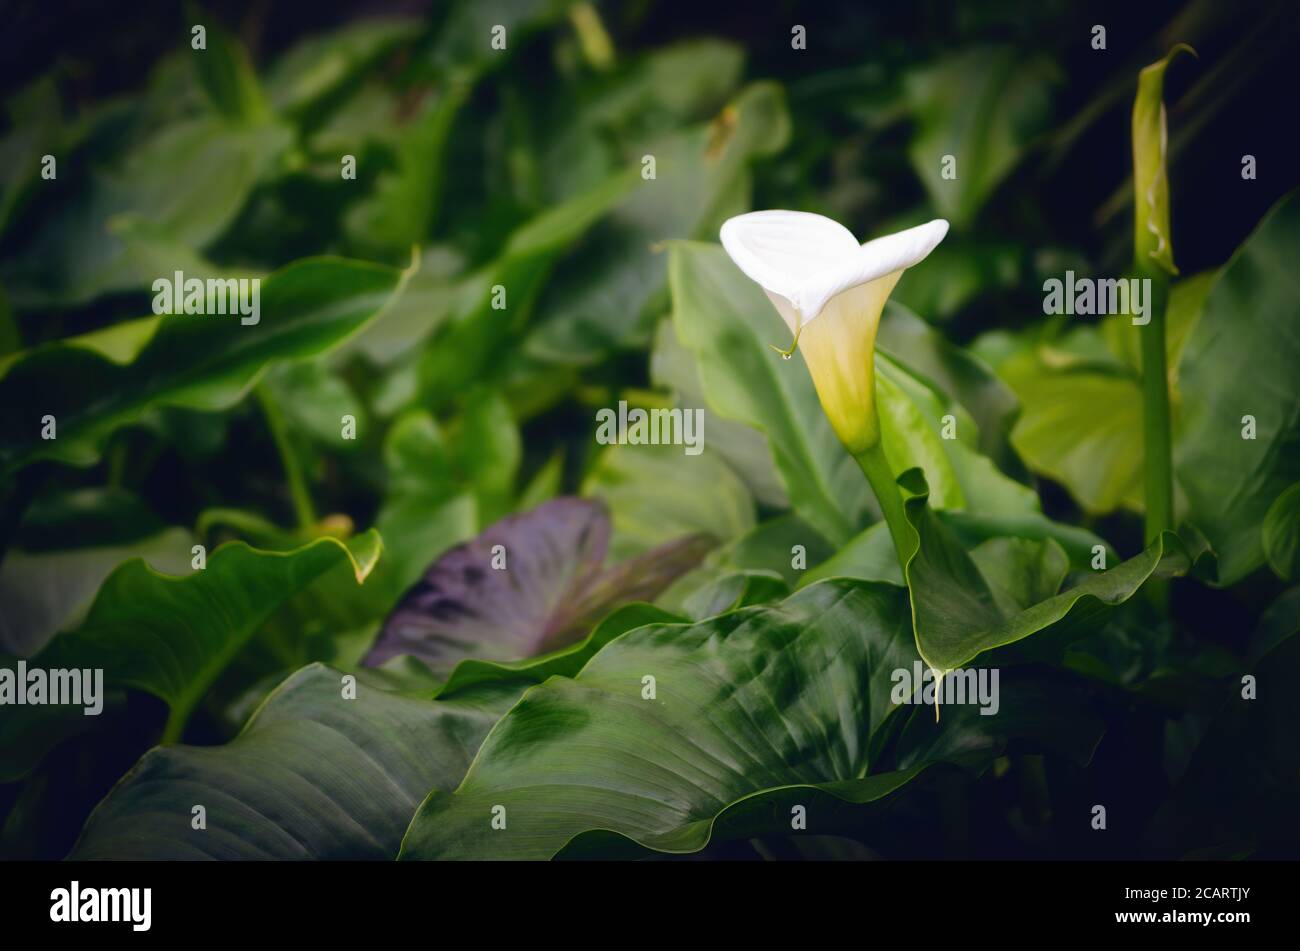 White calla lily flower alone in a small water pond full of green leaves Stock Photo